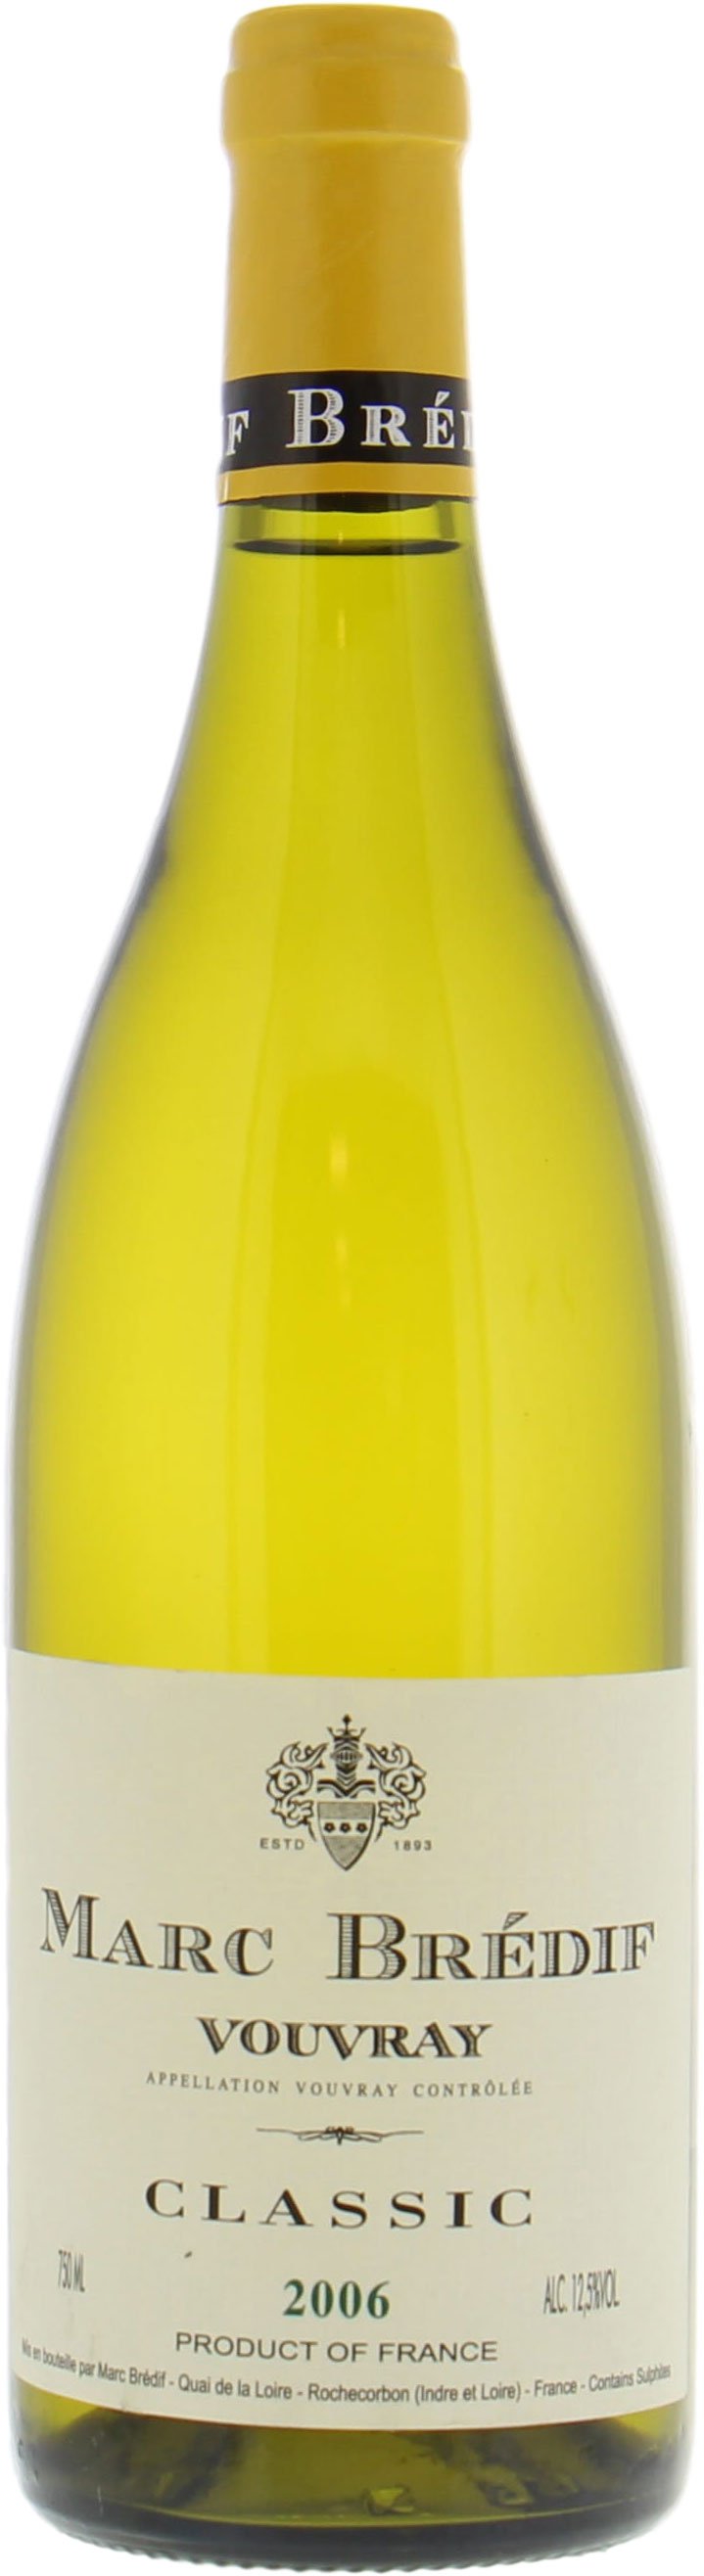 Marc Bredif - Vouvray Grande Annee 2006 Perfect